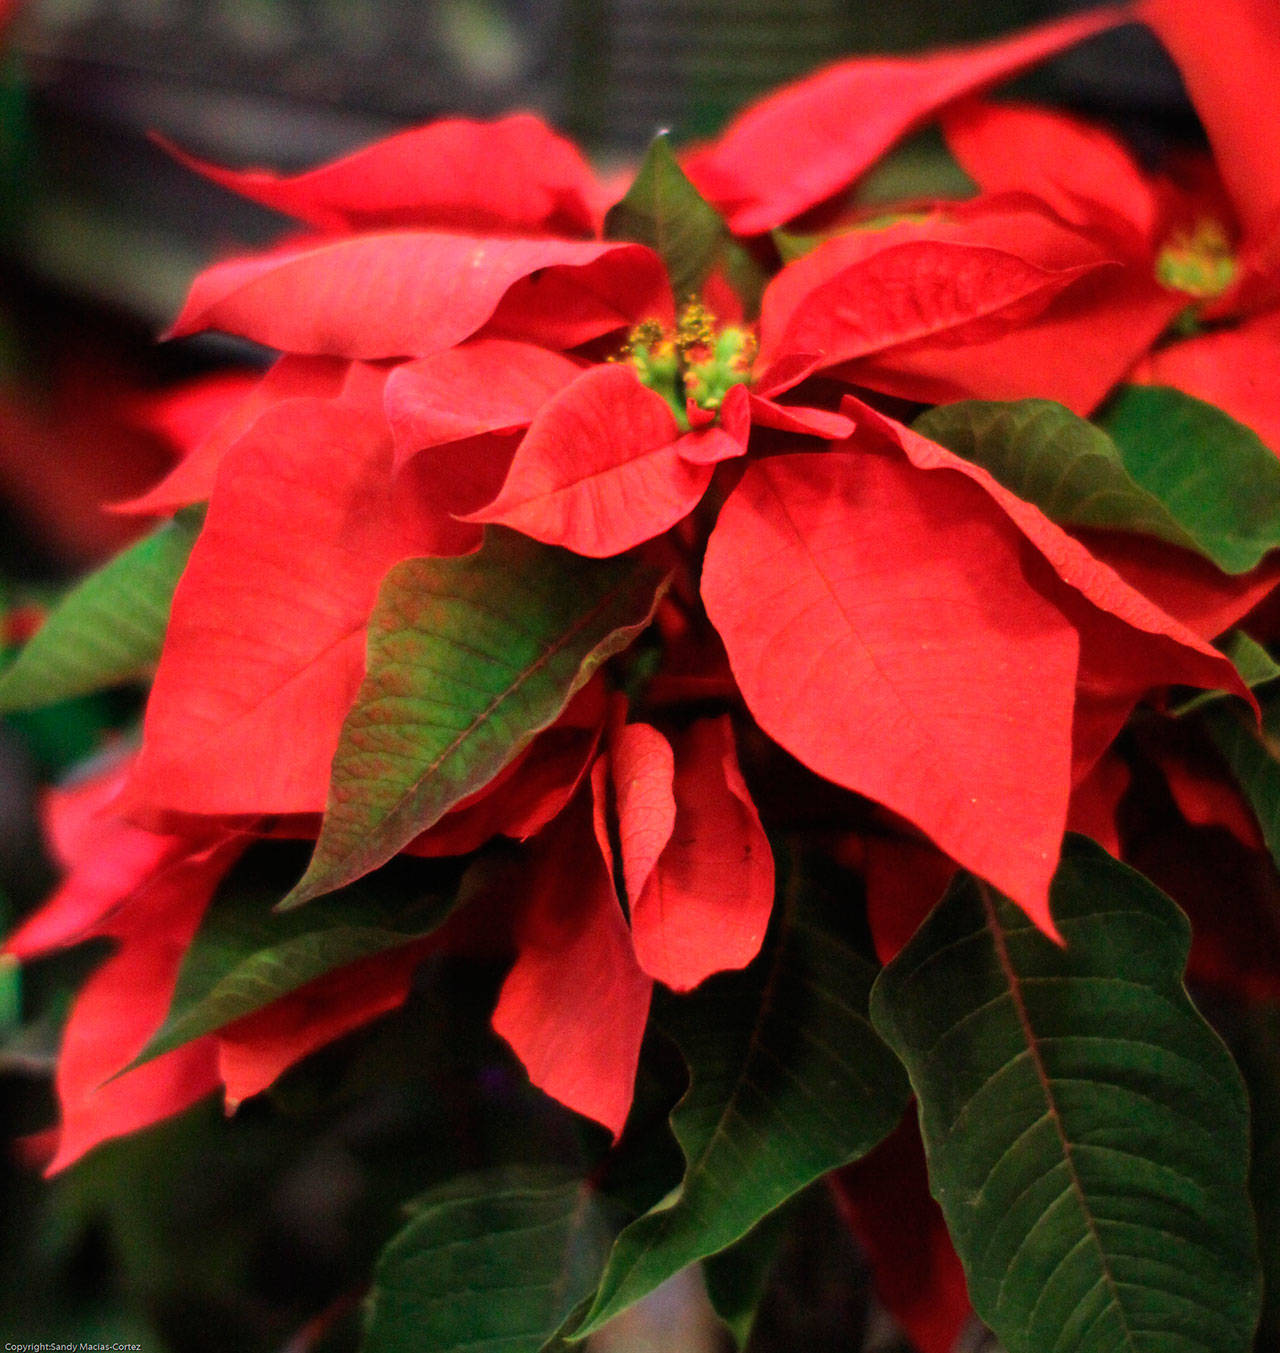 Originally a tall, rangy bush with only a few flowers, current-day poinsettias are bushier plants, supporting more blossoms that hang on the plant for longer. Photo by Sandy Cortez